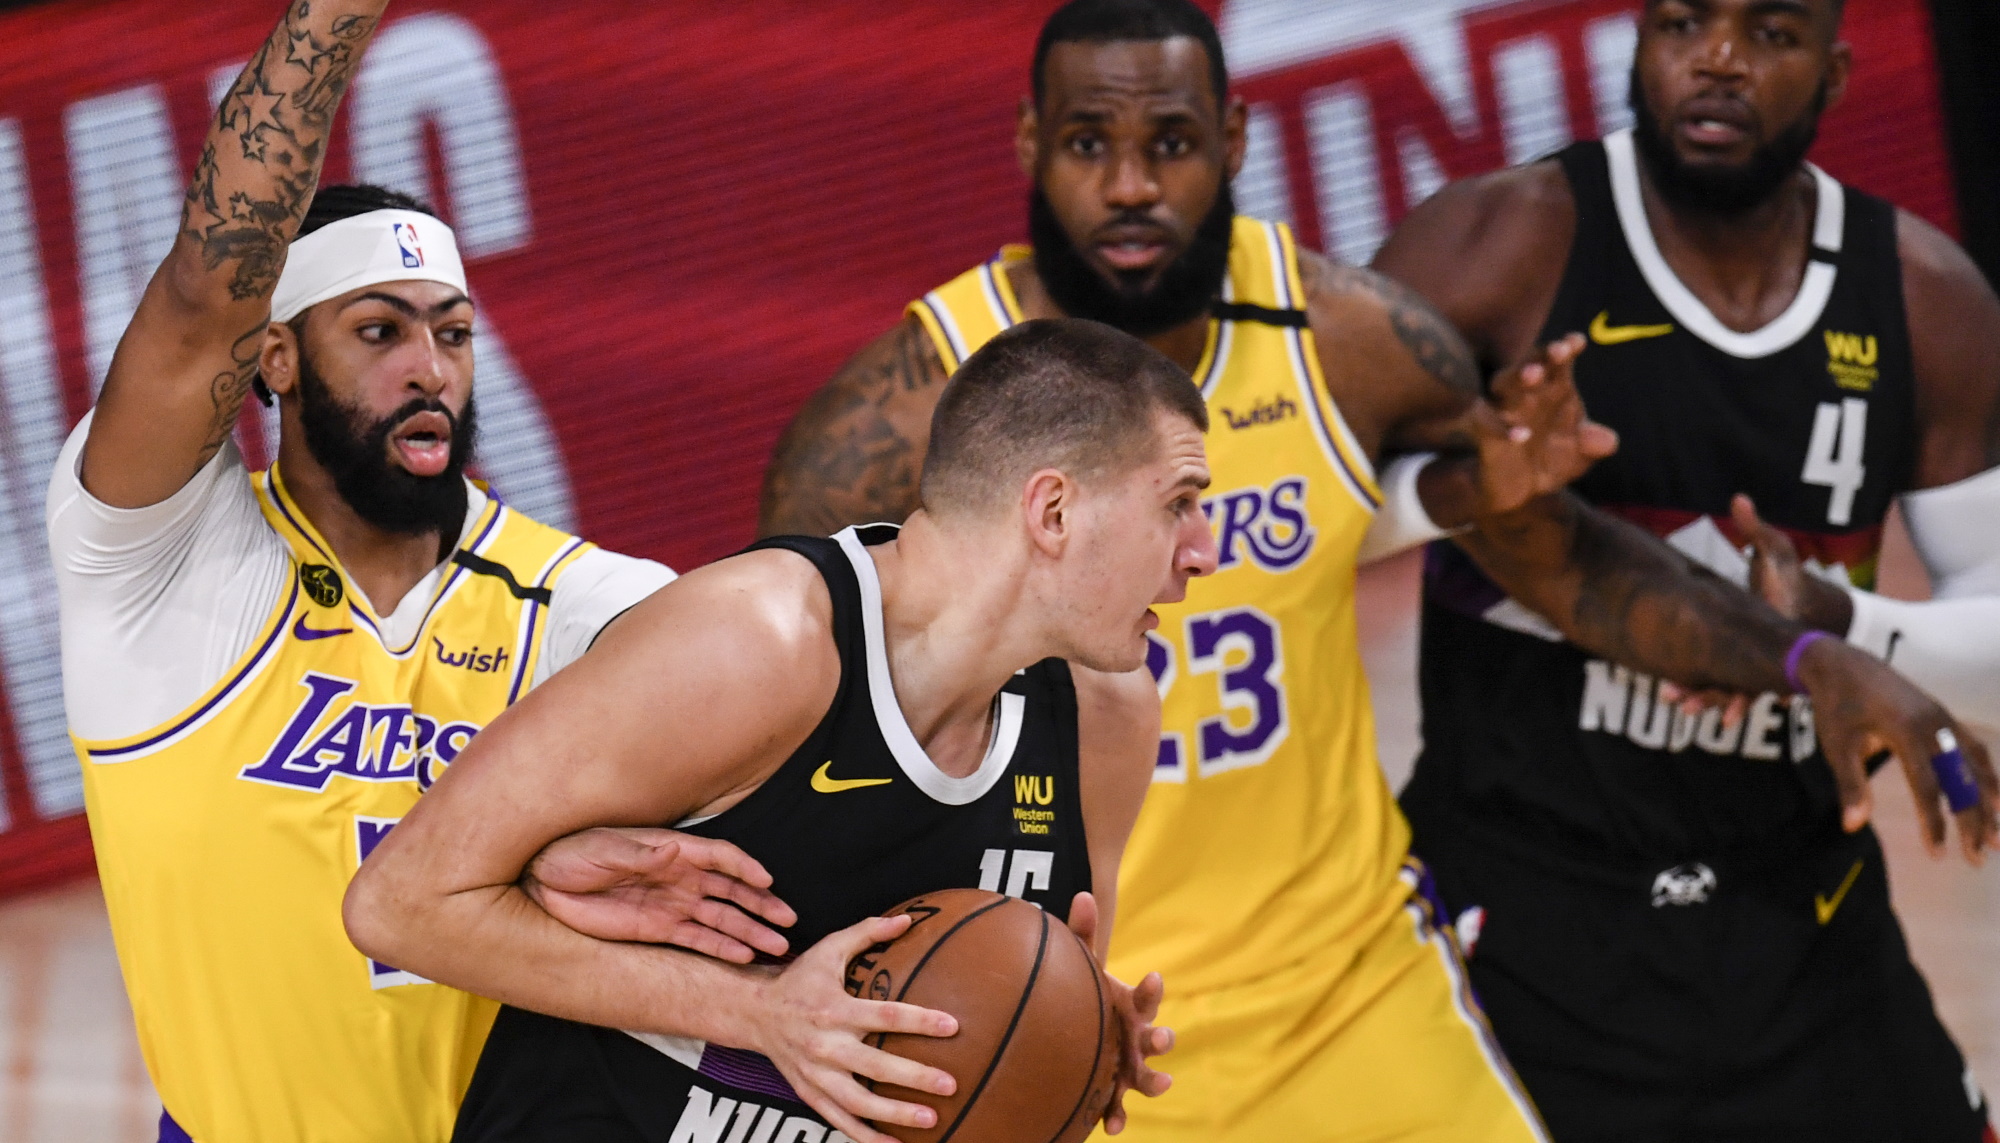 Lakers vs Nuggets live stream how to watch Game 5 NBA playoffs online